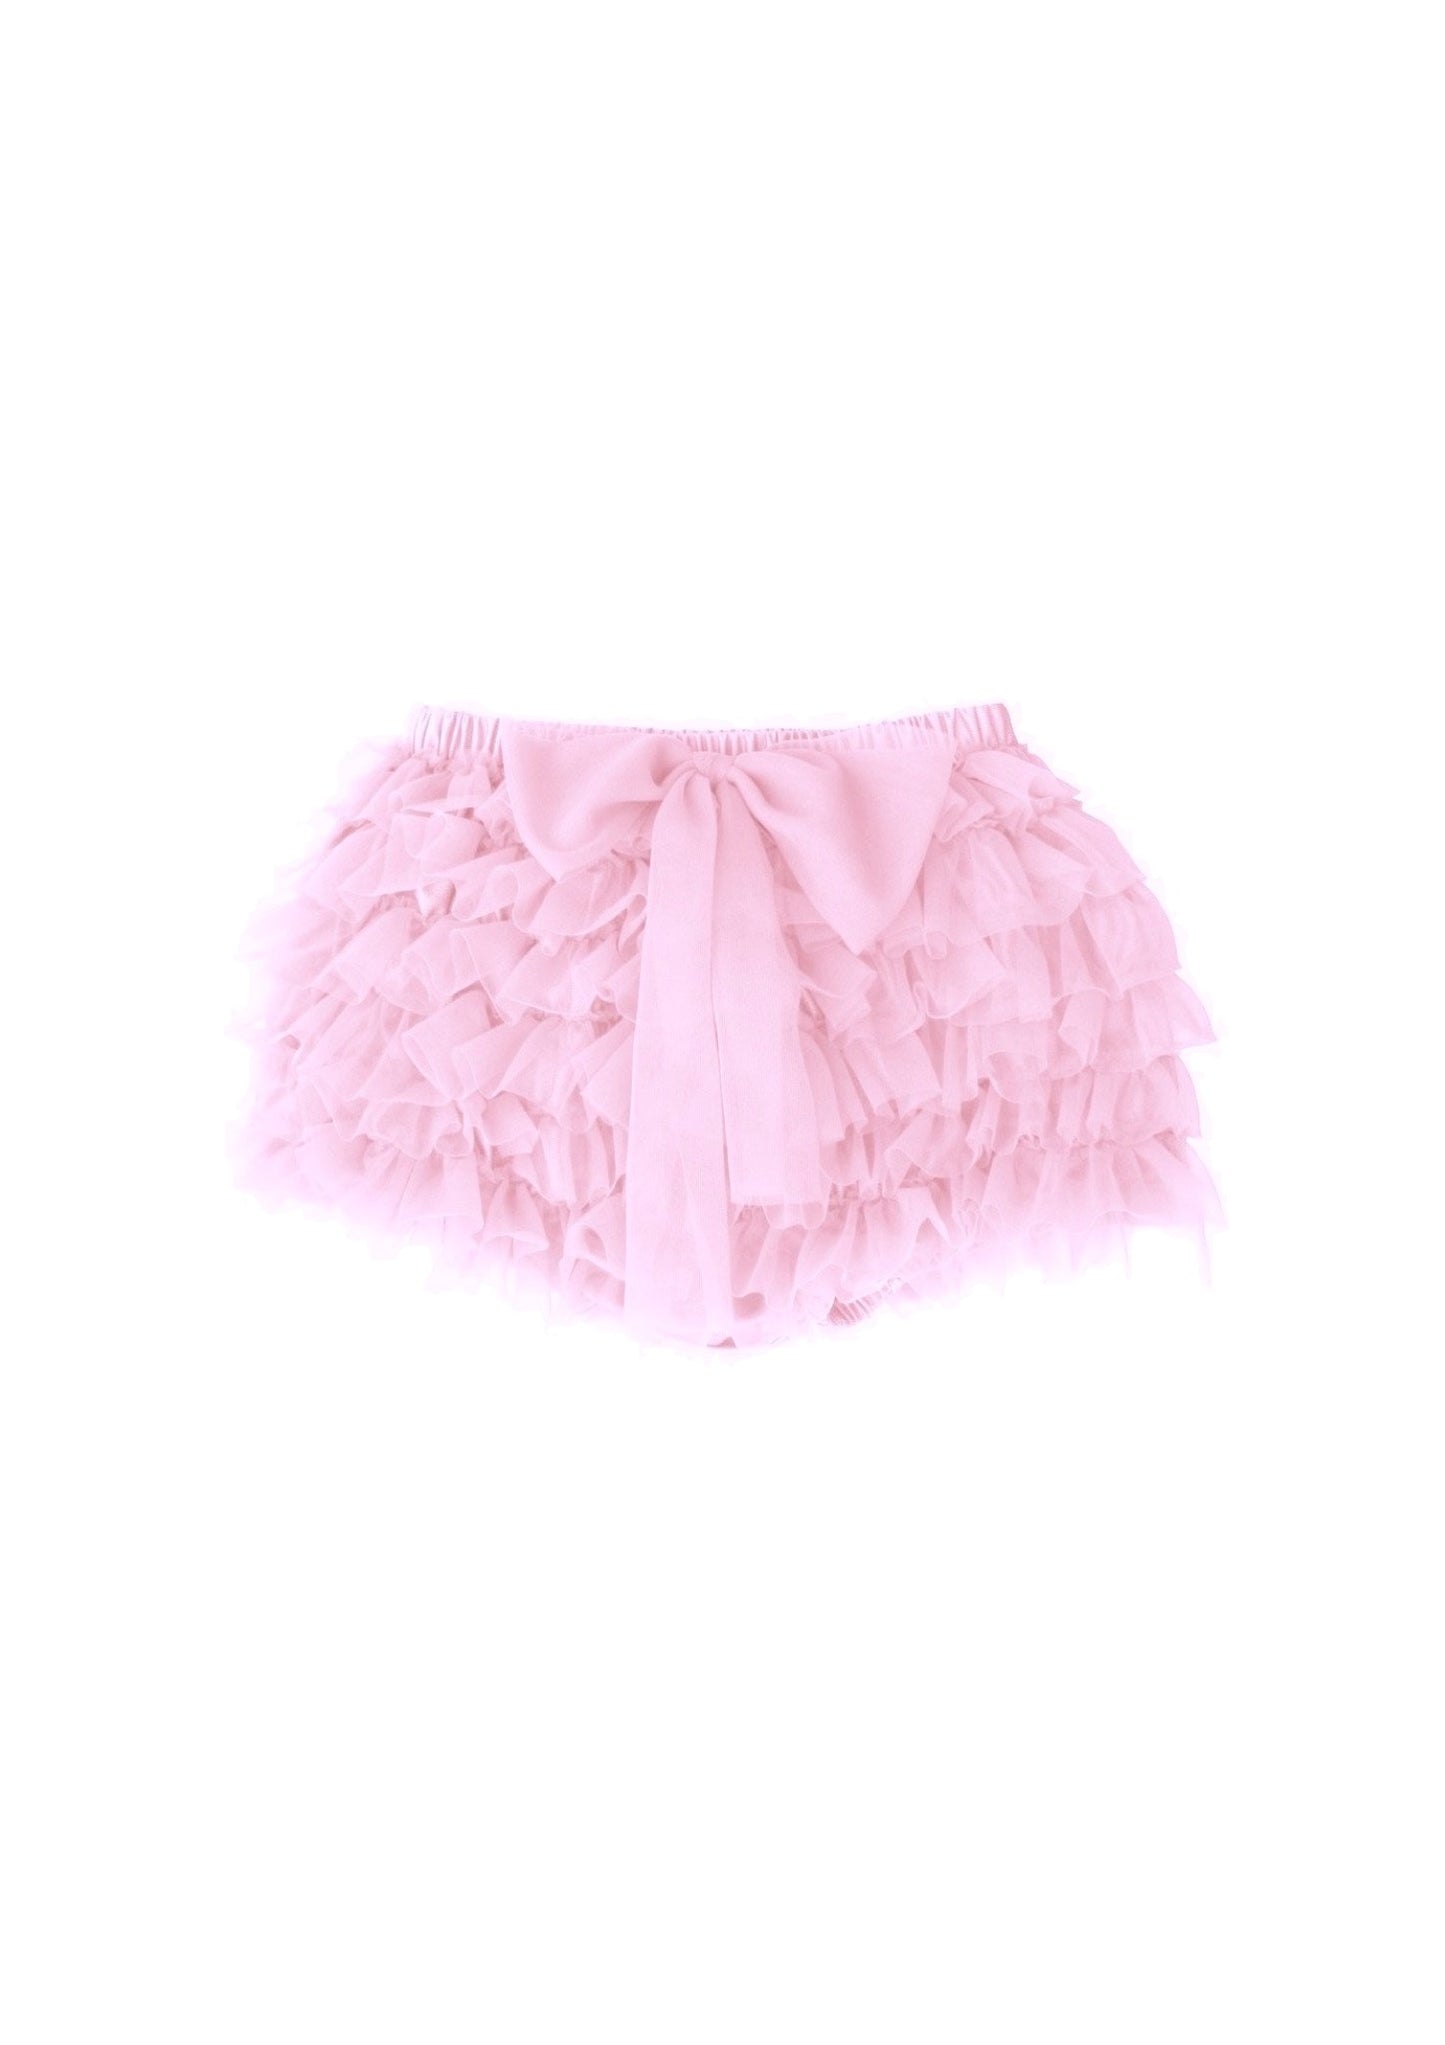 DOLLY by Le Petit Tom ® FRILLY PANTS Tutu Bloomer strawberry